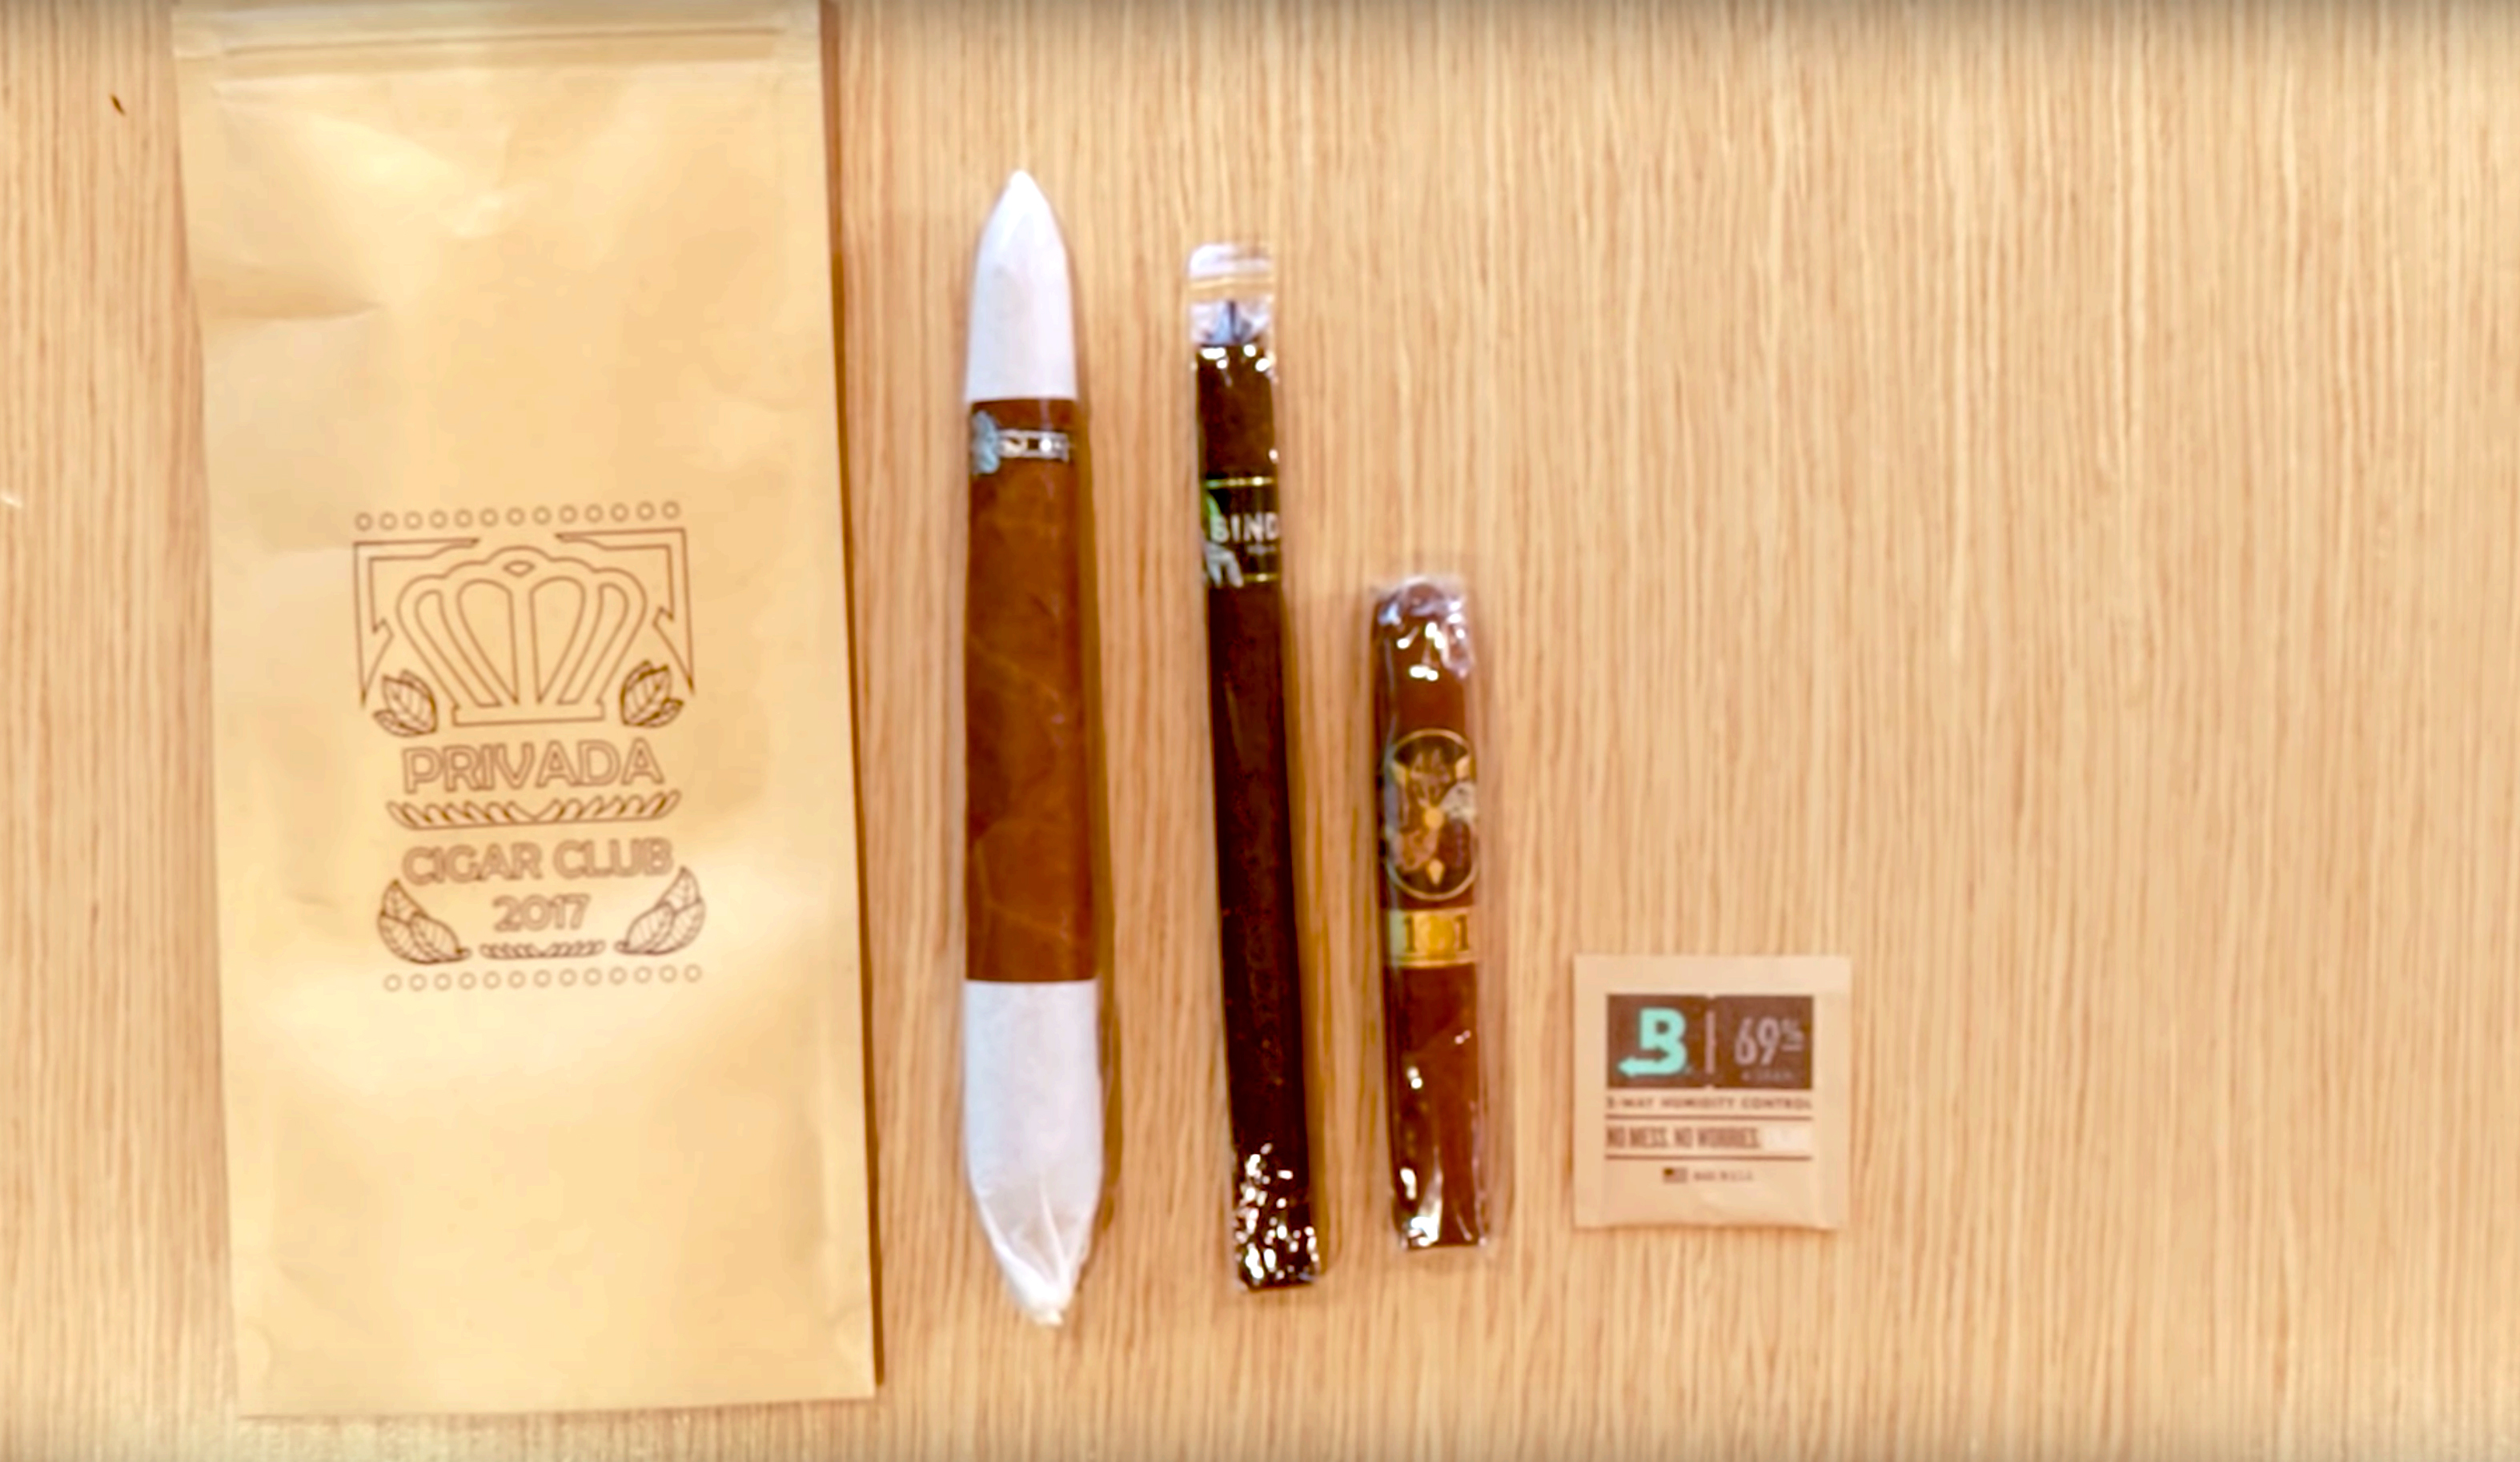 Privada Cigar Club sends 3 cigars (most of them aged or hard-to-find smokes), along with tasting notes and pairing ideas. Boveda keeps all the hand-picked cigars fresh in transit and until they're ready to smoke.